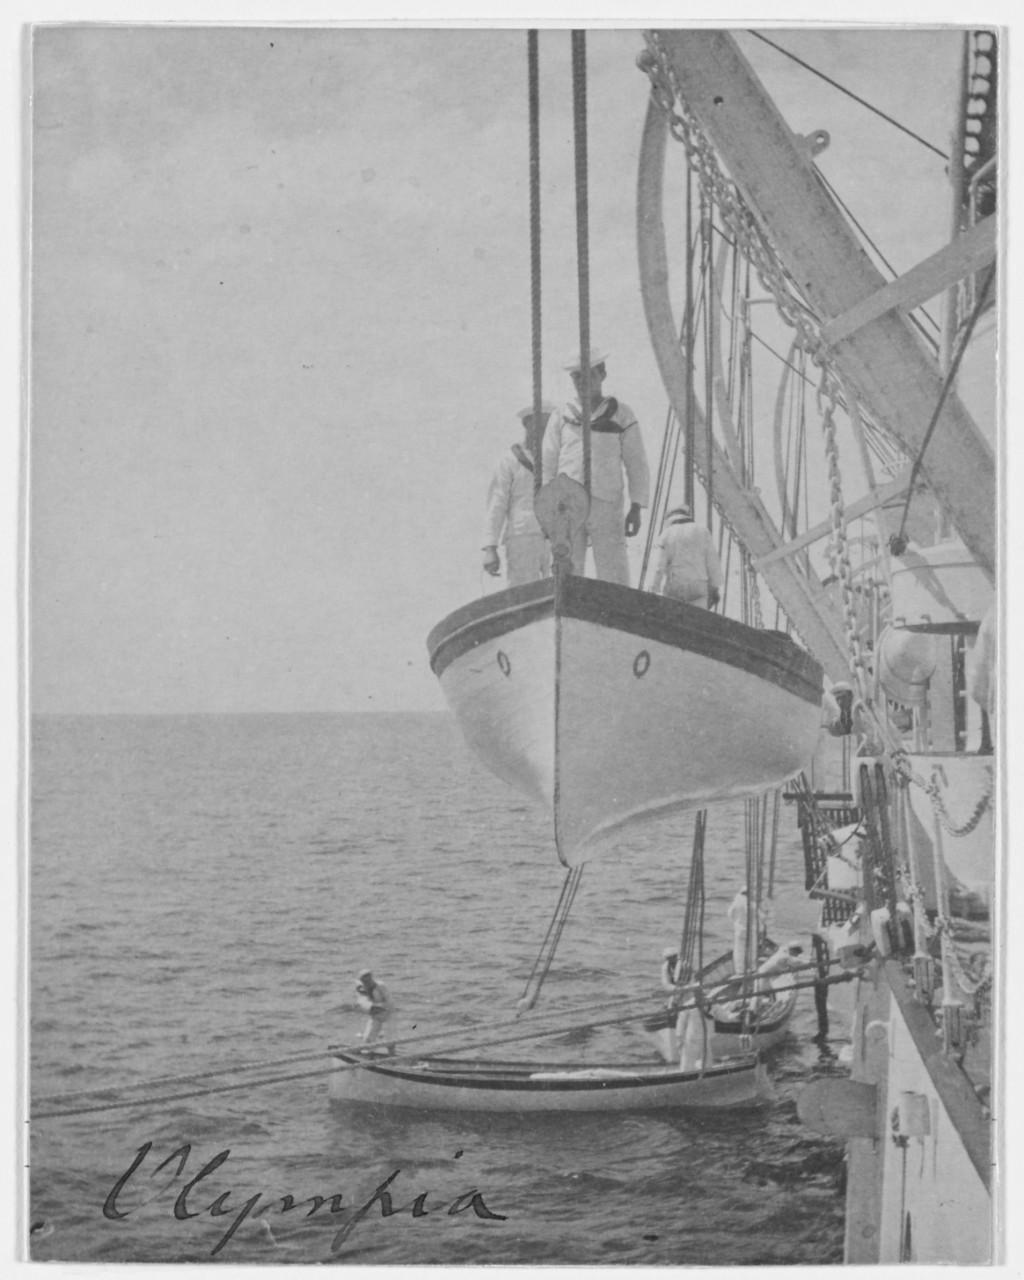 USS OLYMPIA (C-6), one of the ship's boats suspended from davits, 1898. 